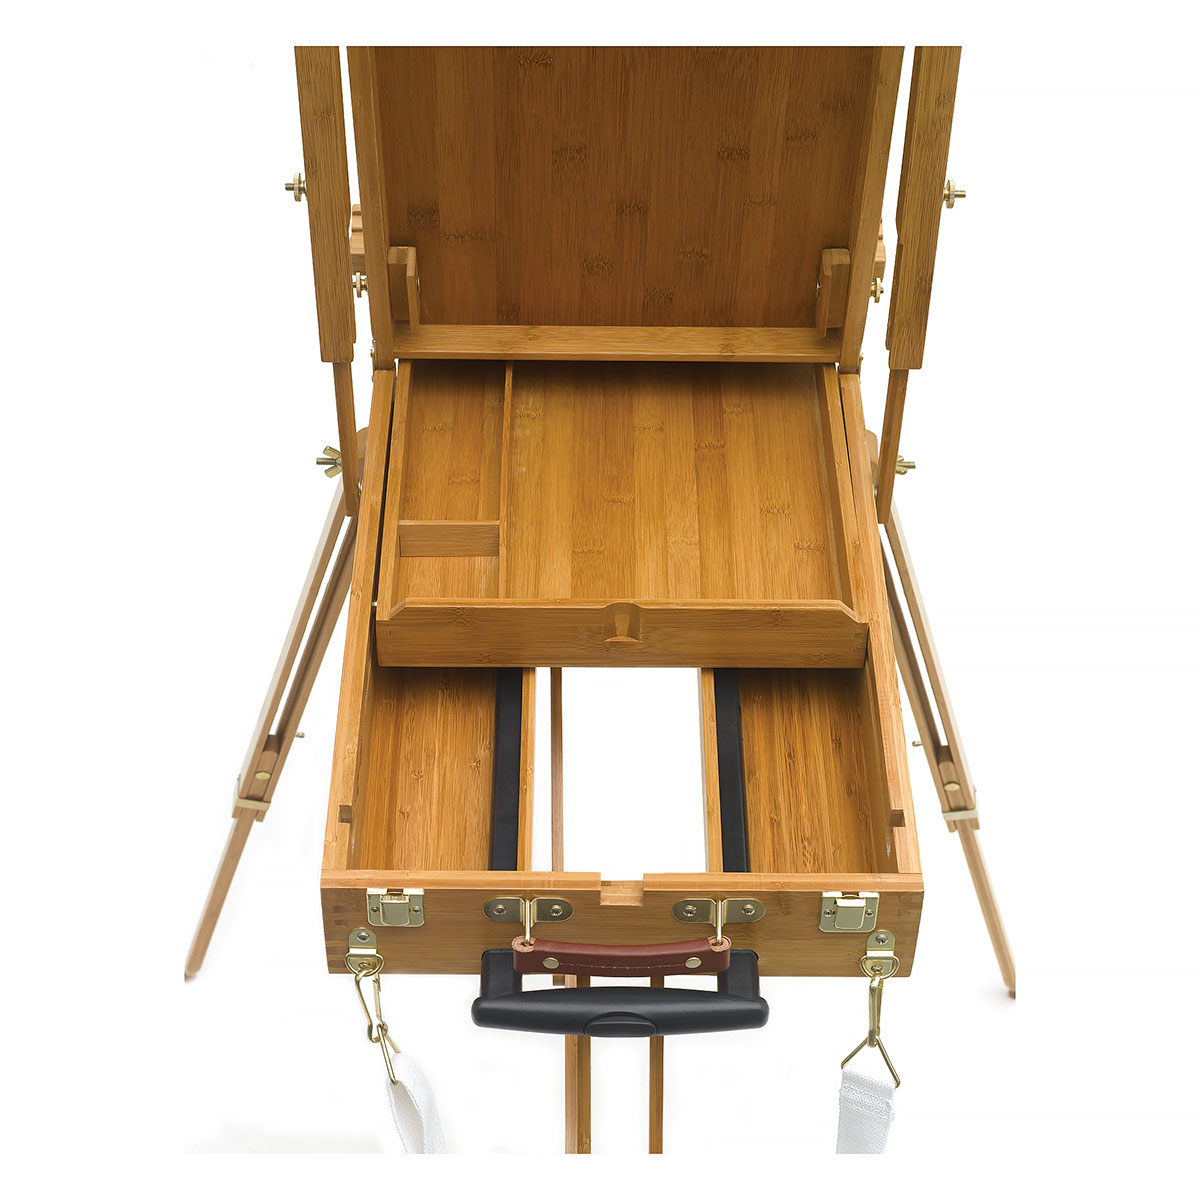 Bamboo Sonoma Sketch Box Easel, Full French Easel - 082435135021